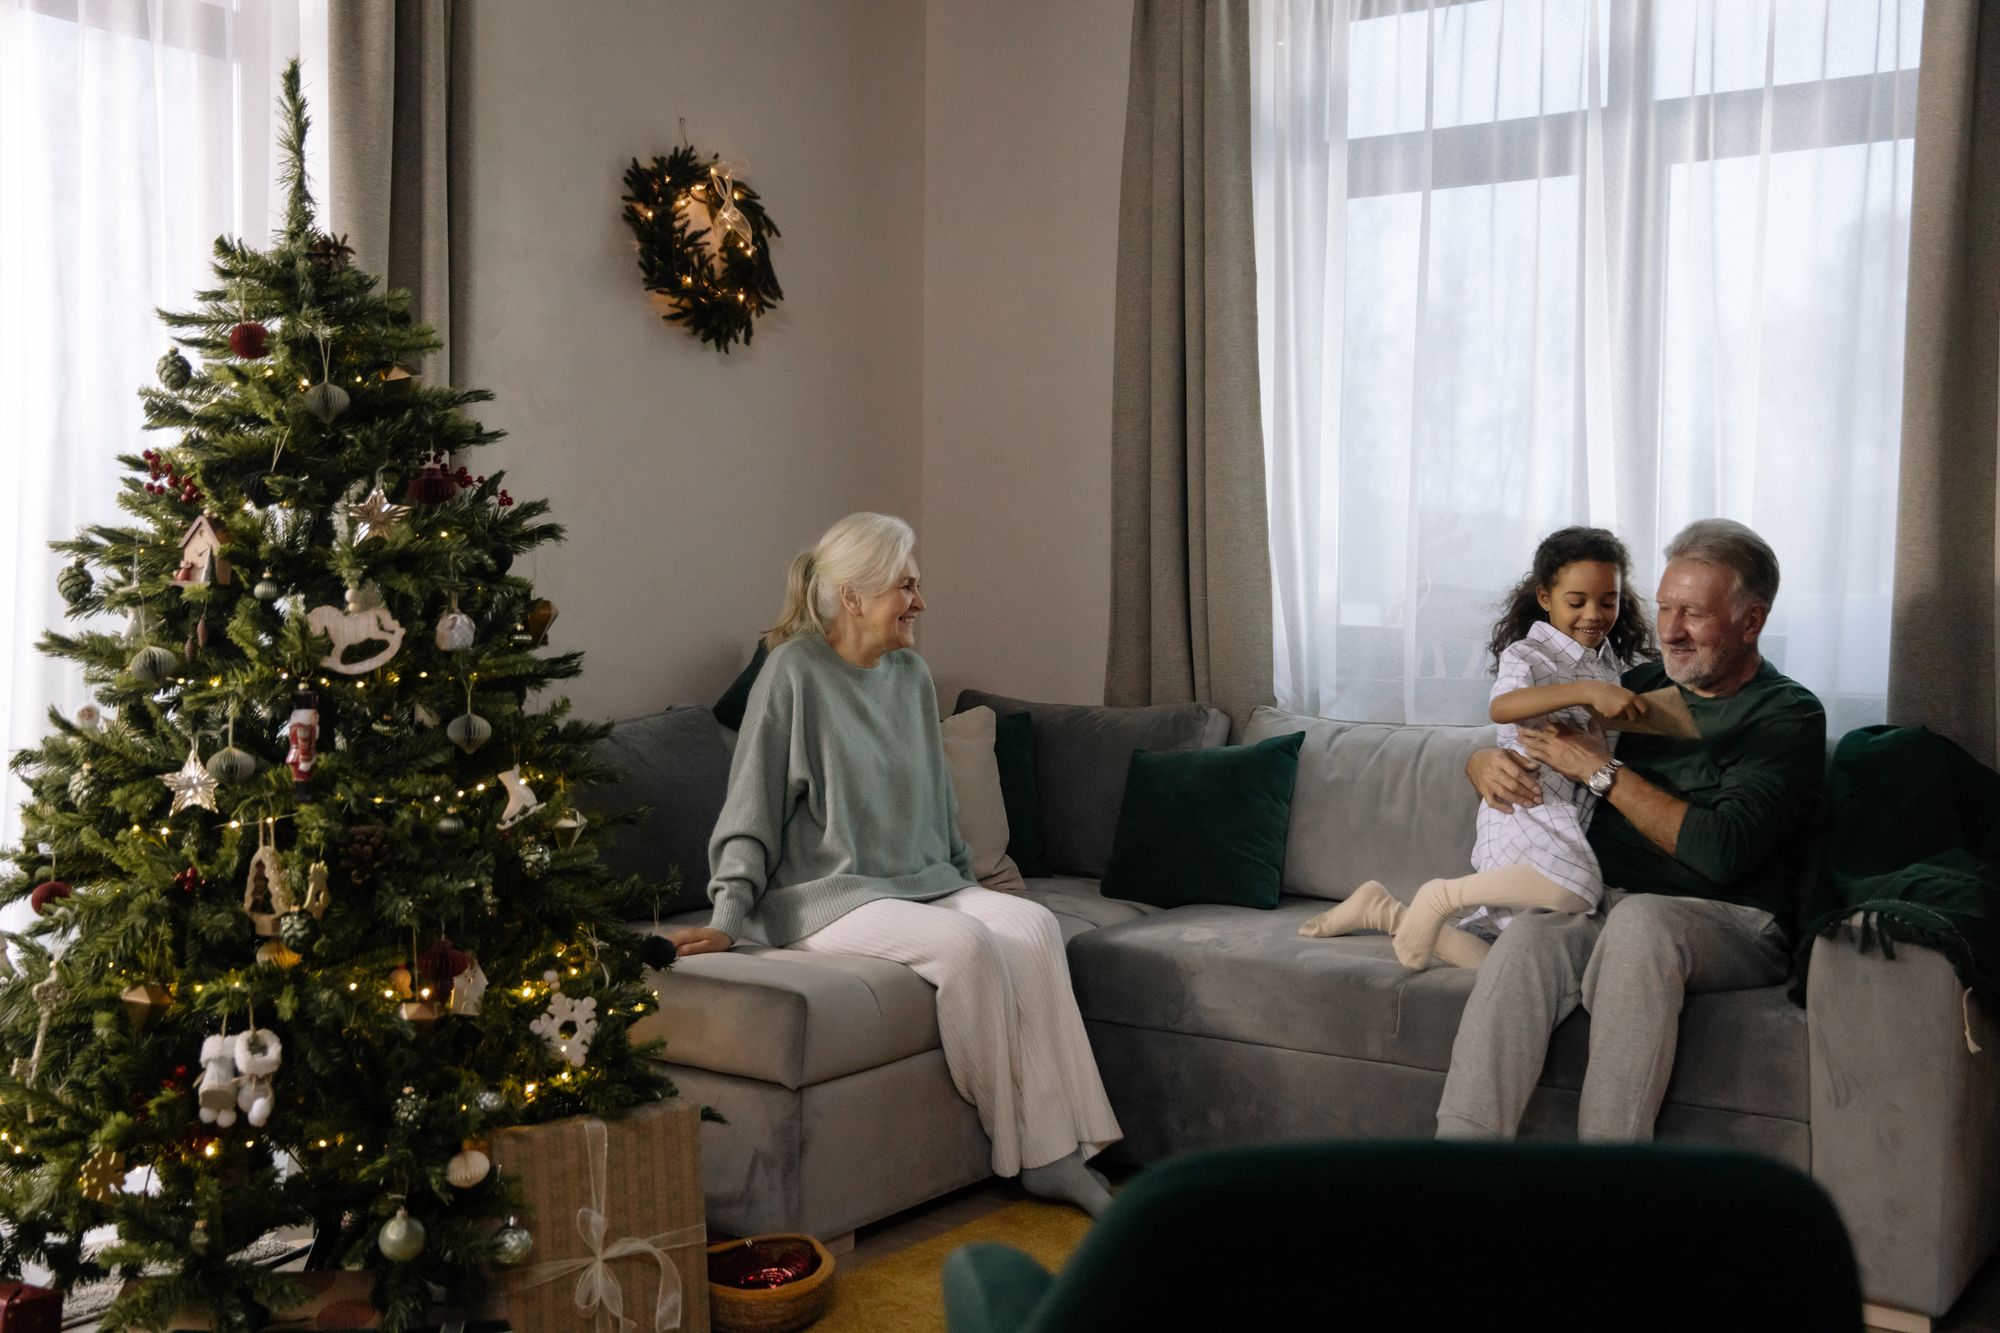 An elderly couple with a young girl during Christmastime.